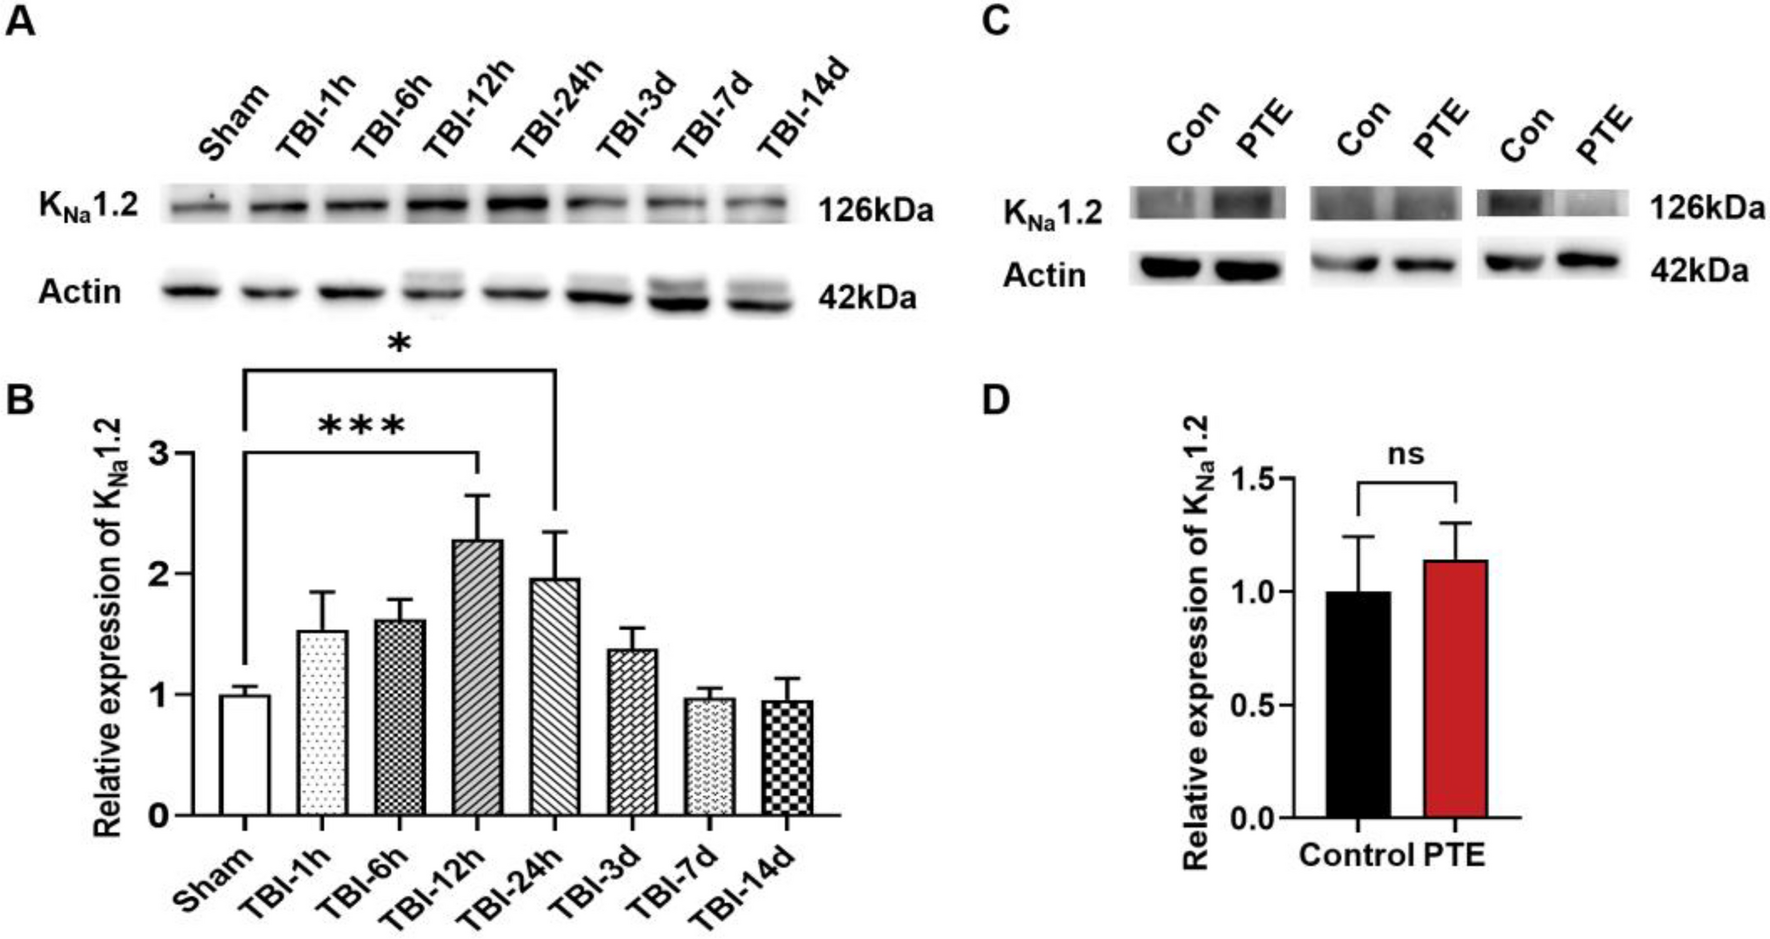 Increased Expression of KNa1.2 Channel by MAPK Pathway Regulates Neuronal Activity Following Traumatic Brain Injury